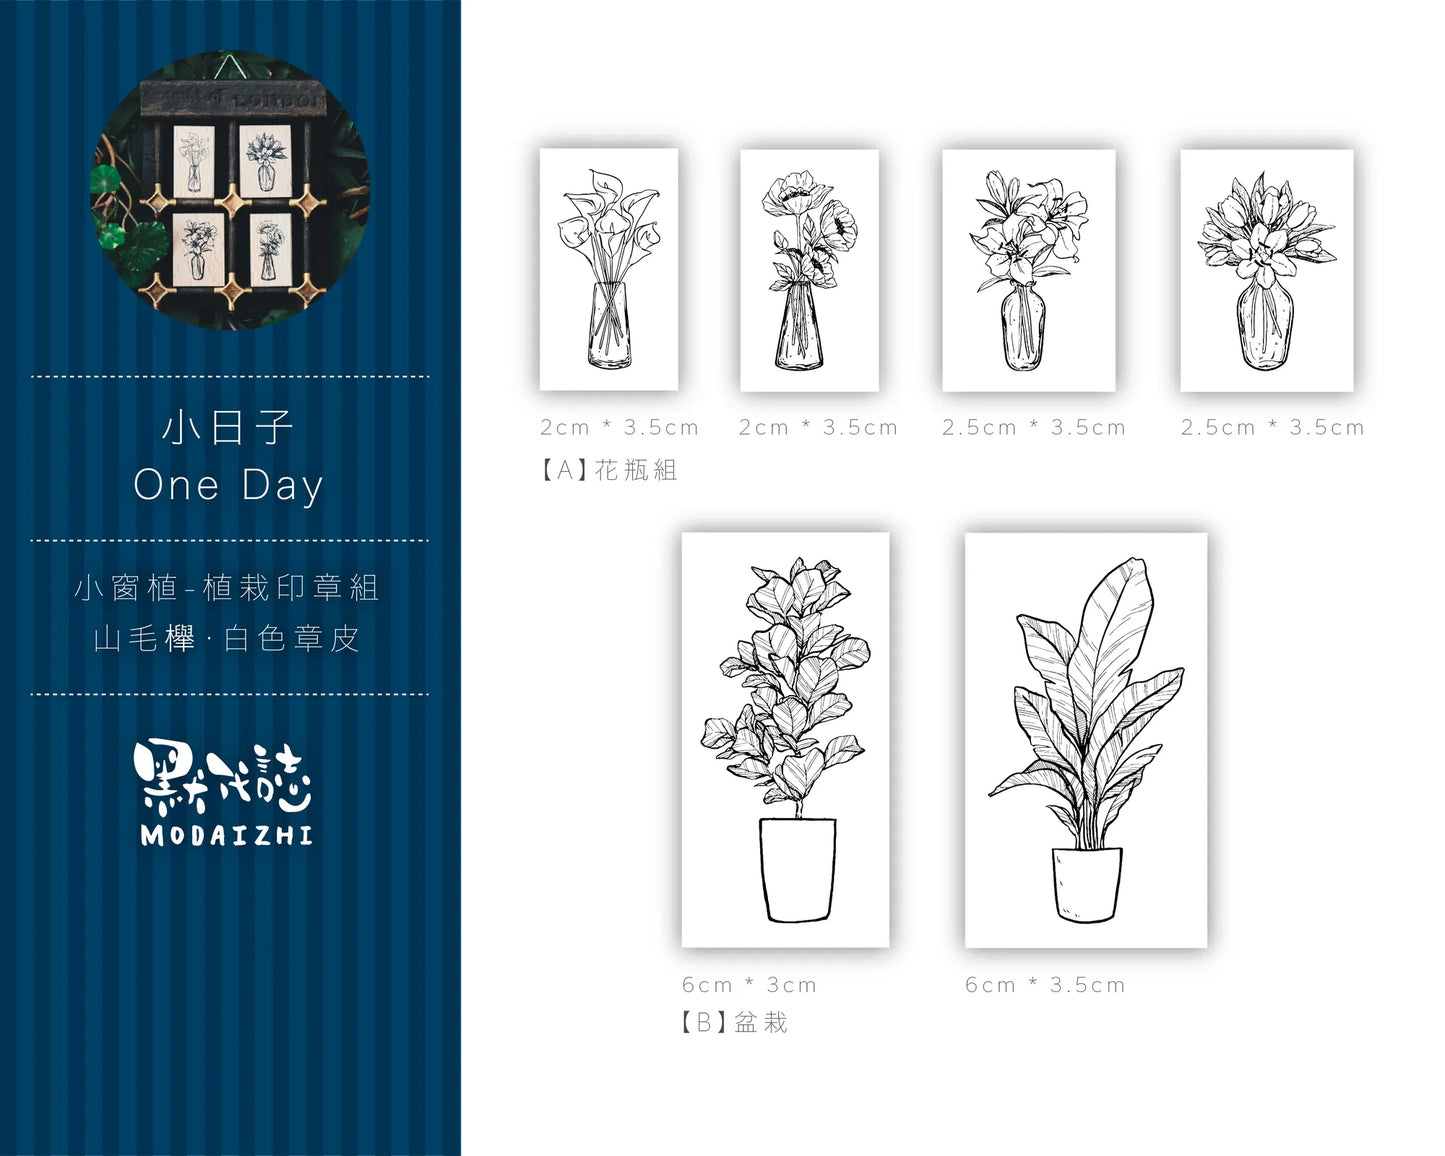 Modaizhi Little View Potted Plants Stamp Set // 2 Options